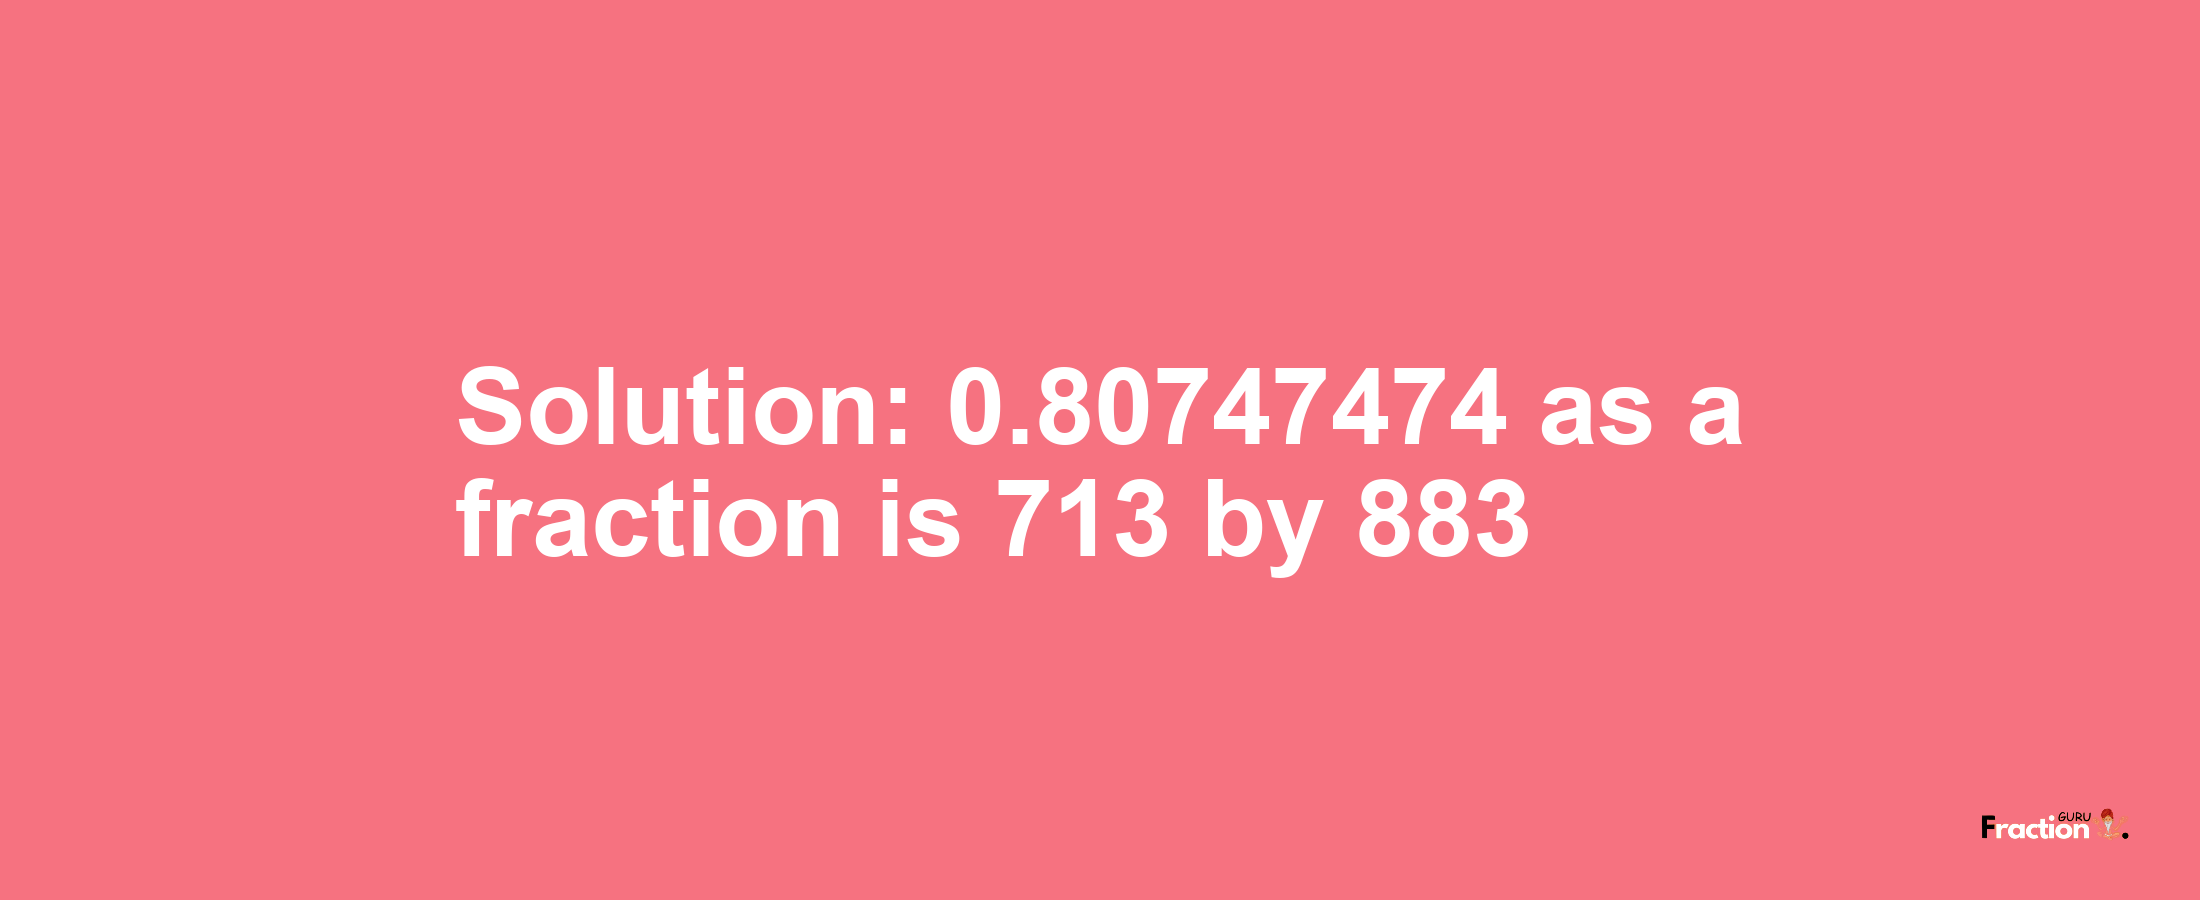 Solution:0.80747474 as a fraction is 713/883